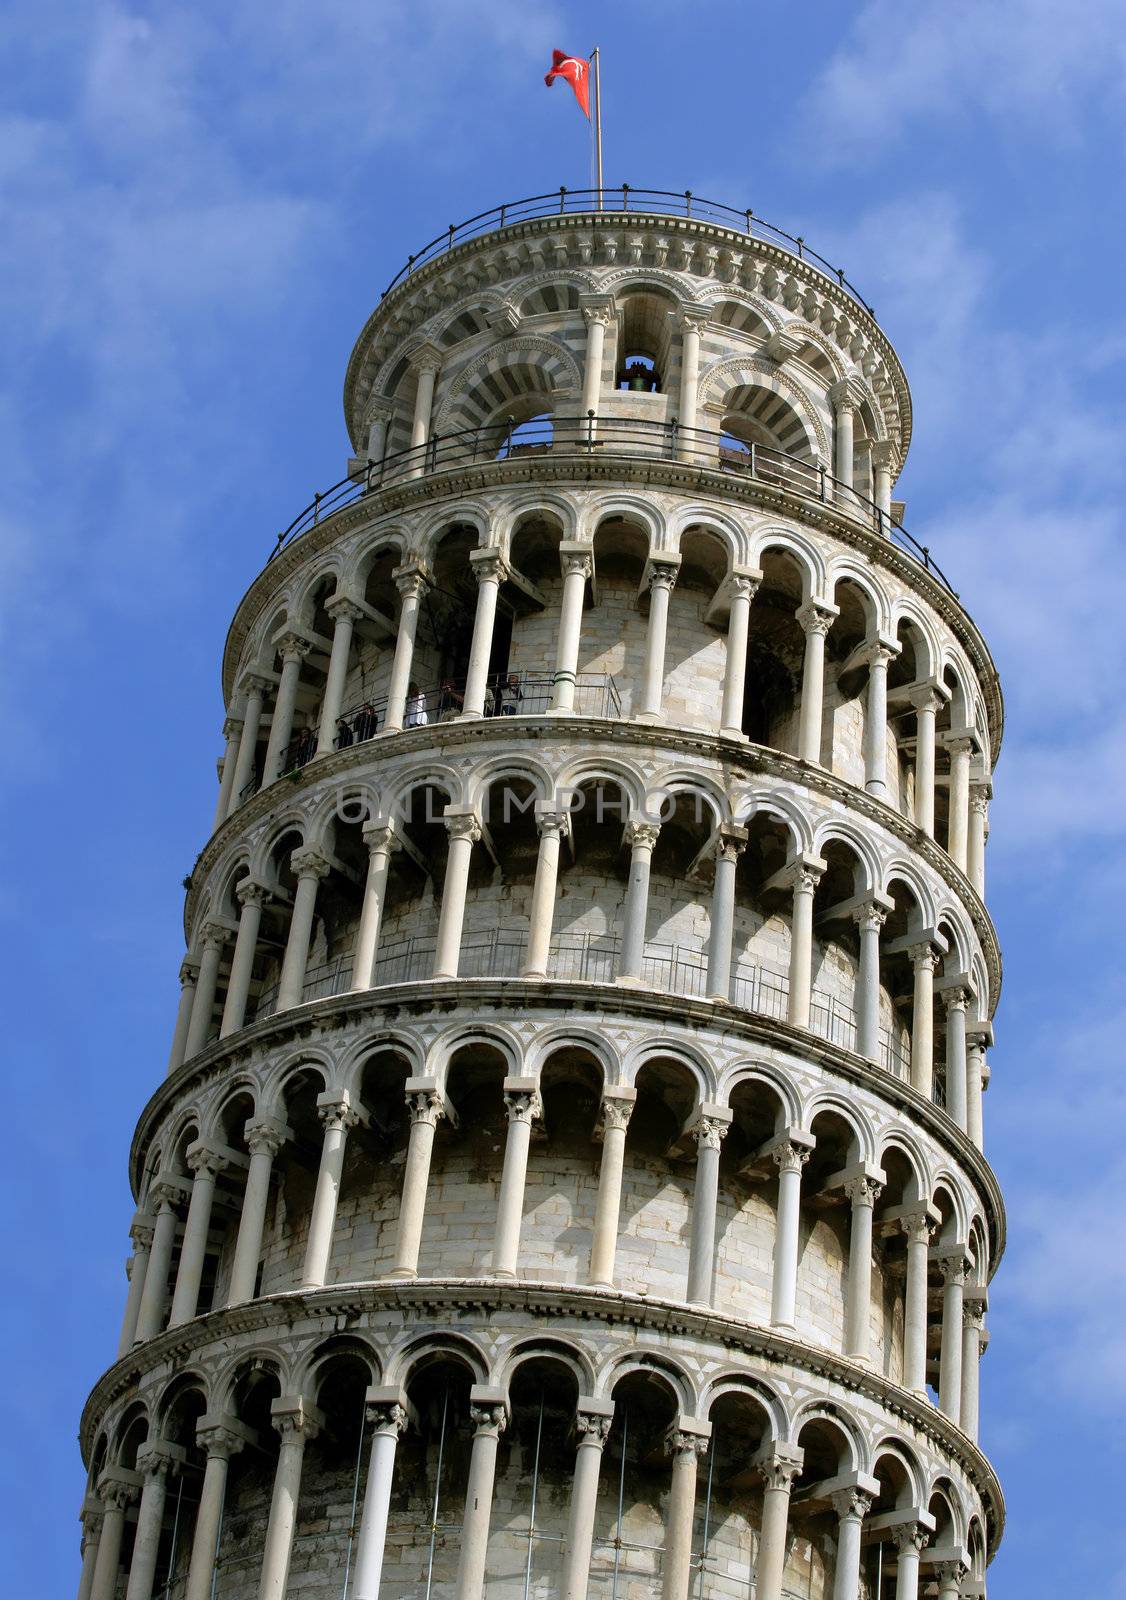 Of course it's the leaning tower of Pisa.
